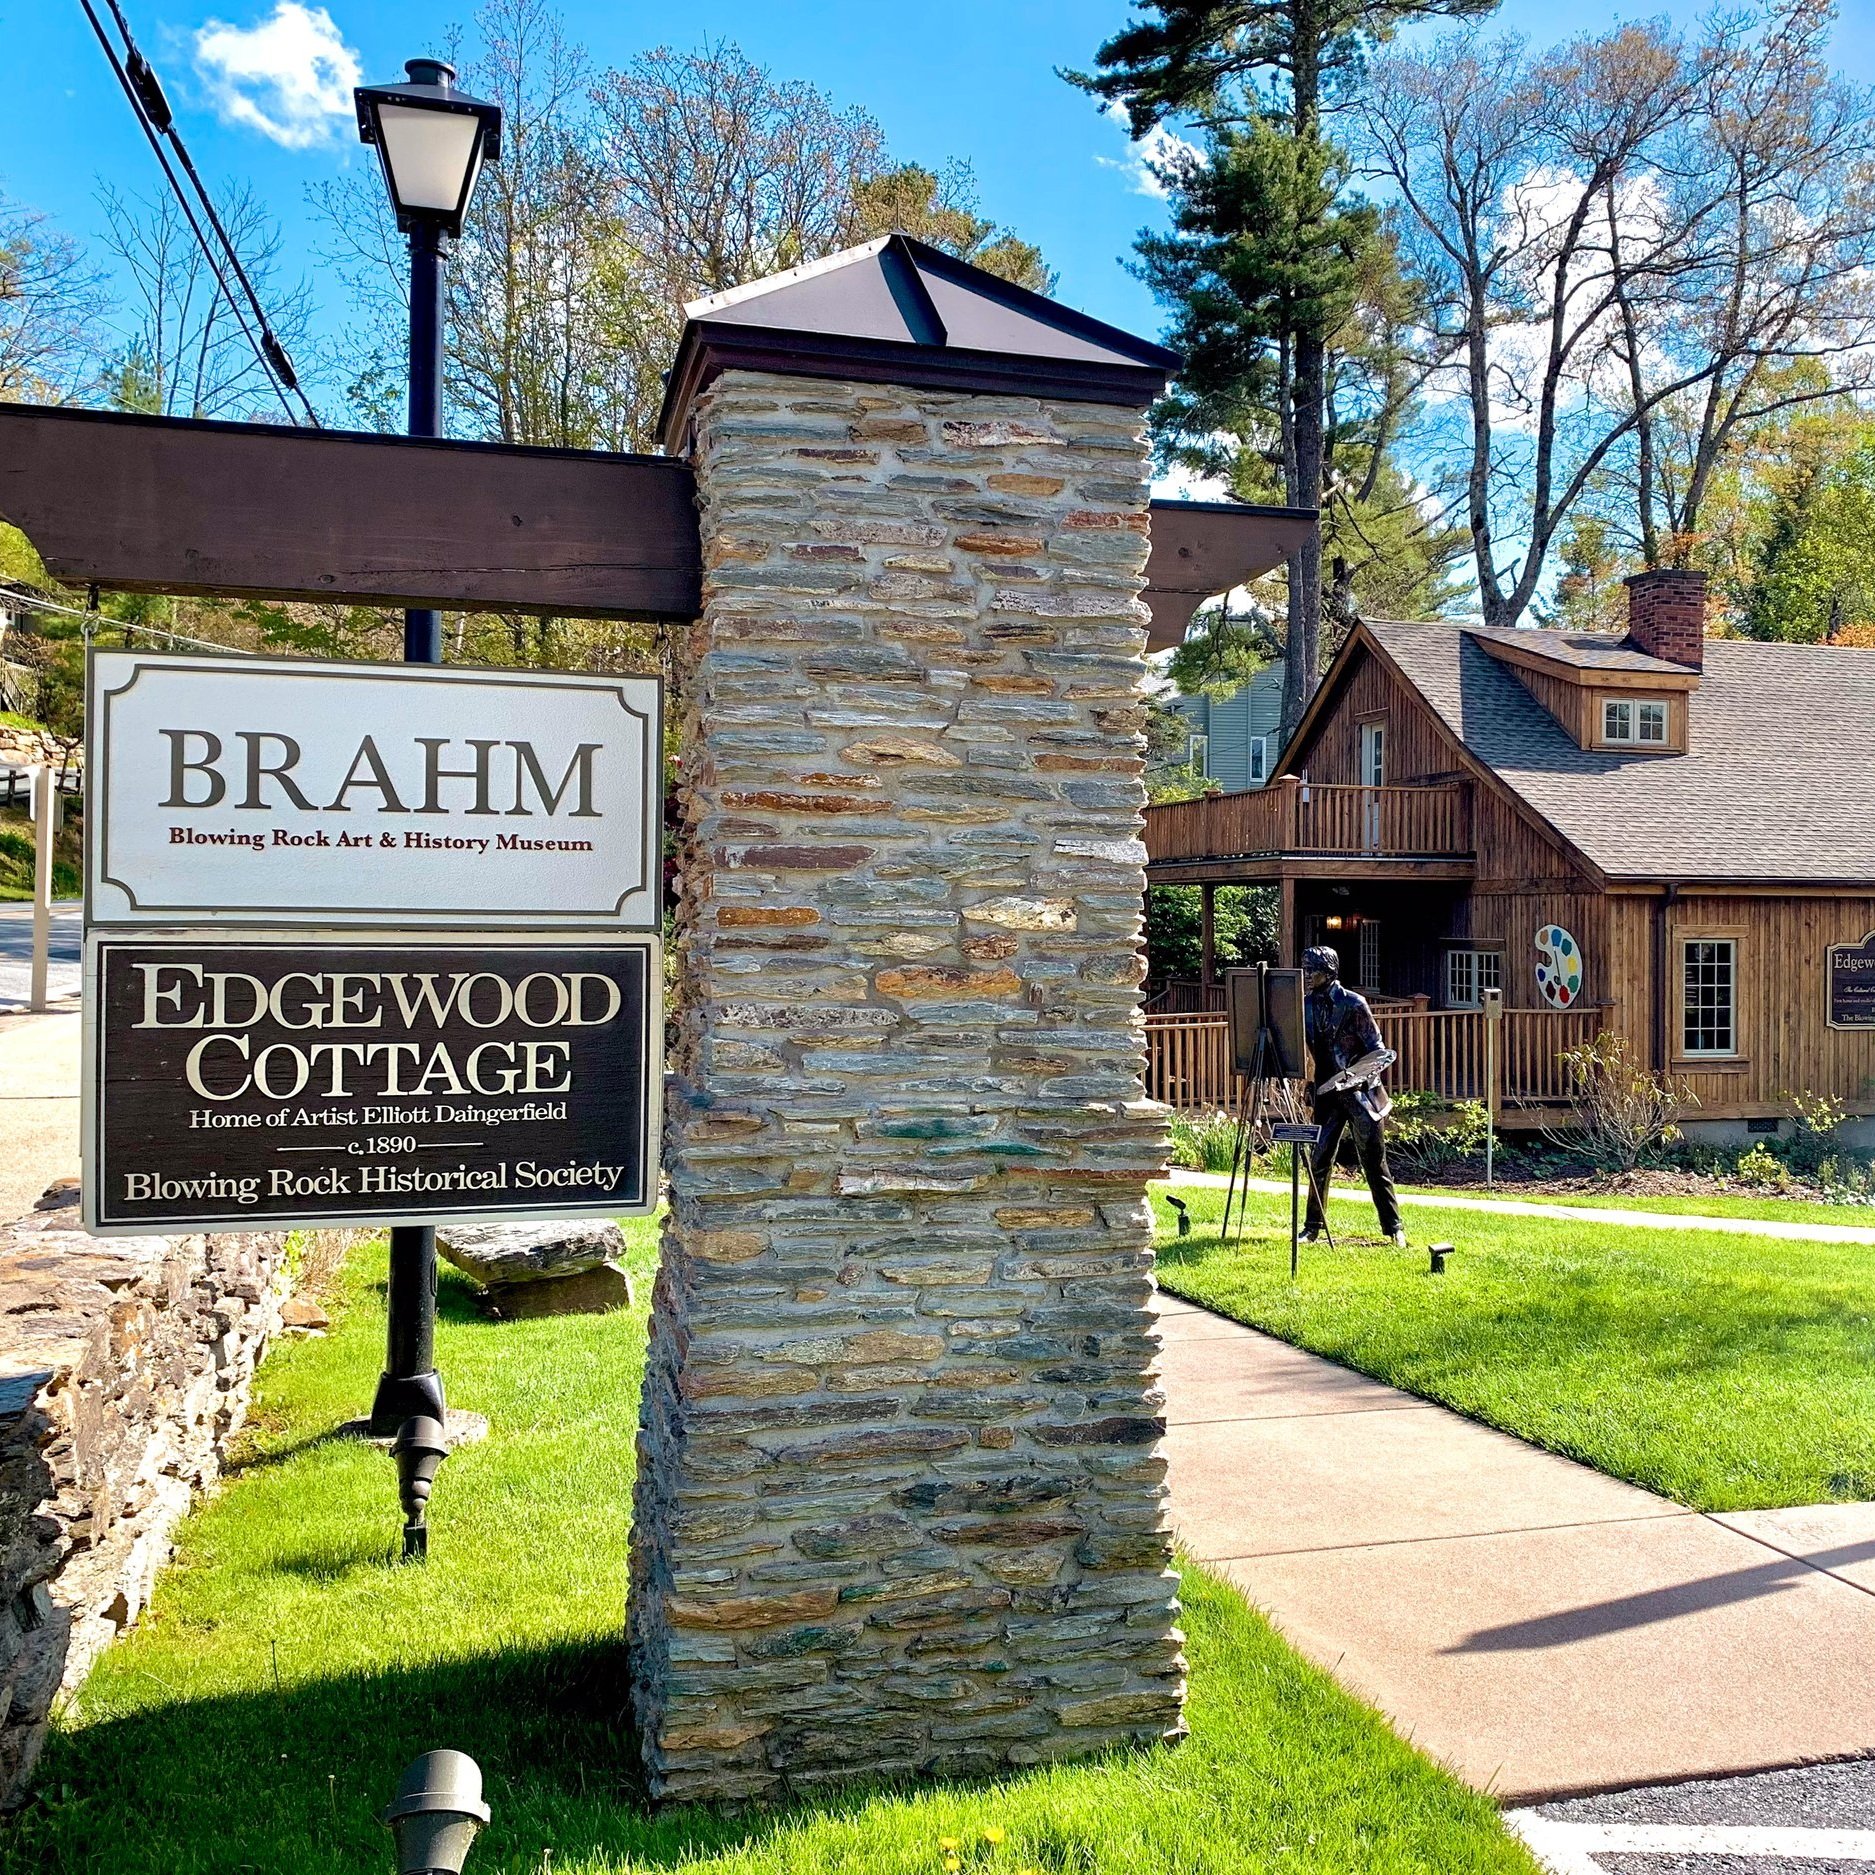 The Edgewood Cottage and BRAHM, right on Main St.